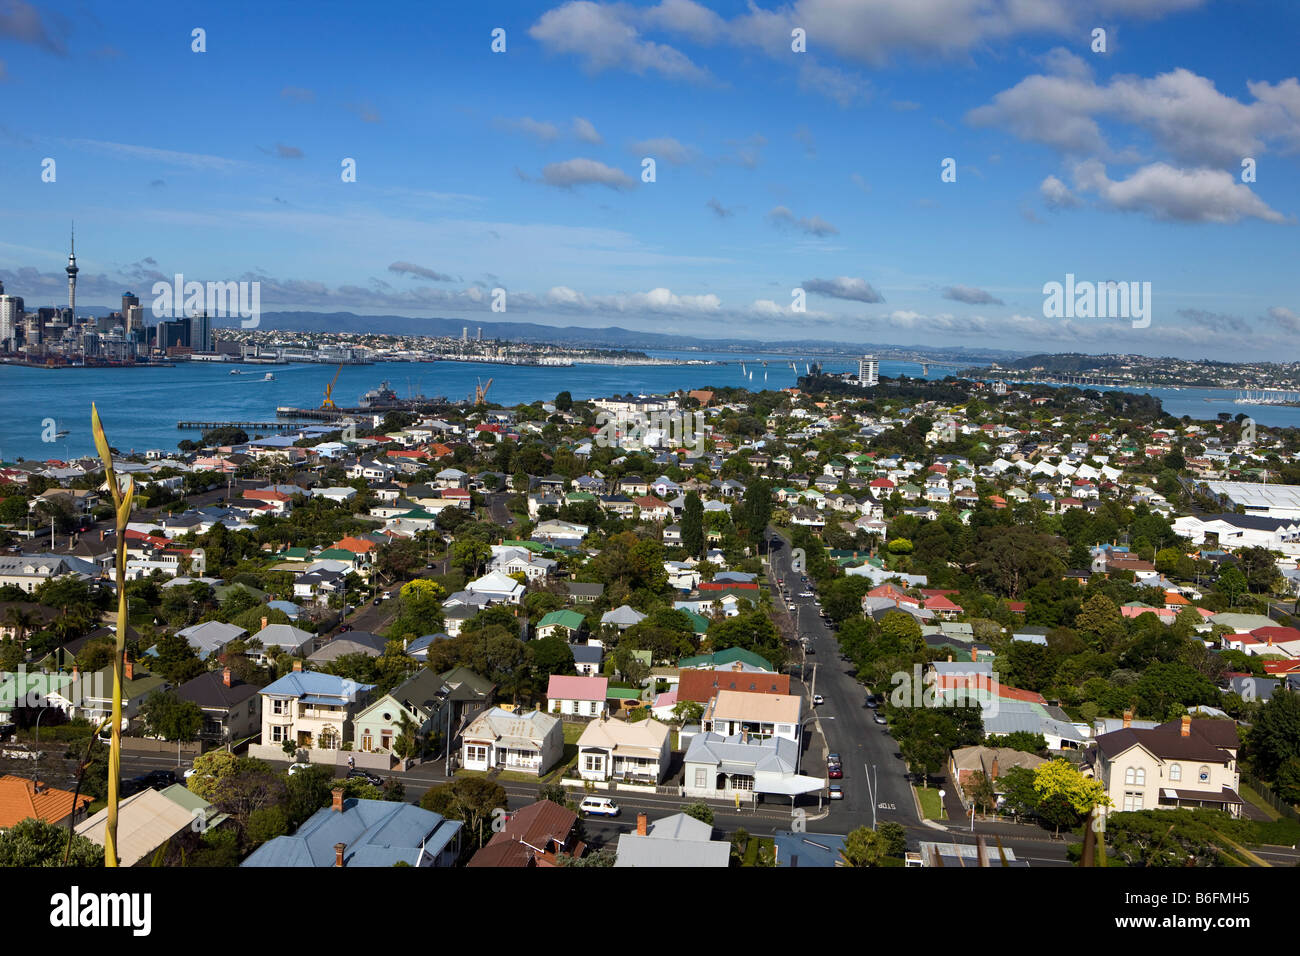 Aerial view from the top of Mount Victoria of Devonport and Waitemata Harbour, Auckland, New Zealand Stock Photo